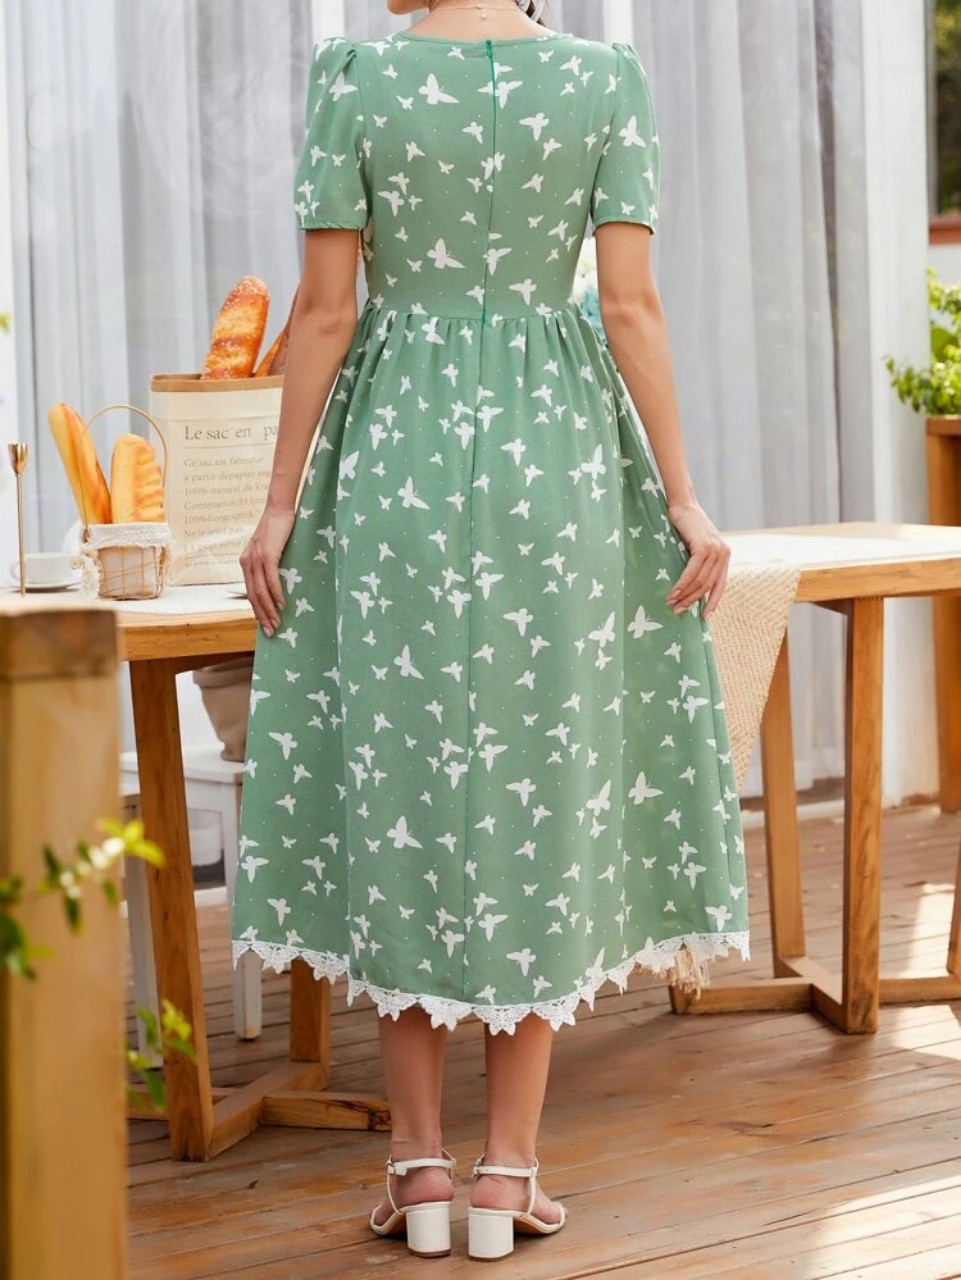 Fashion (Green)women Dress New Floral Printed Summer Butterfly